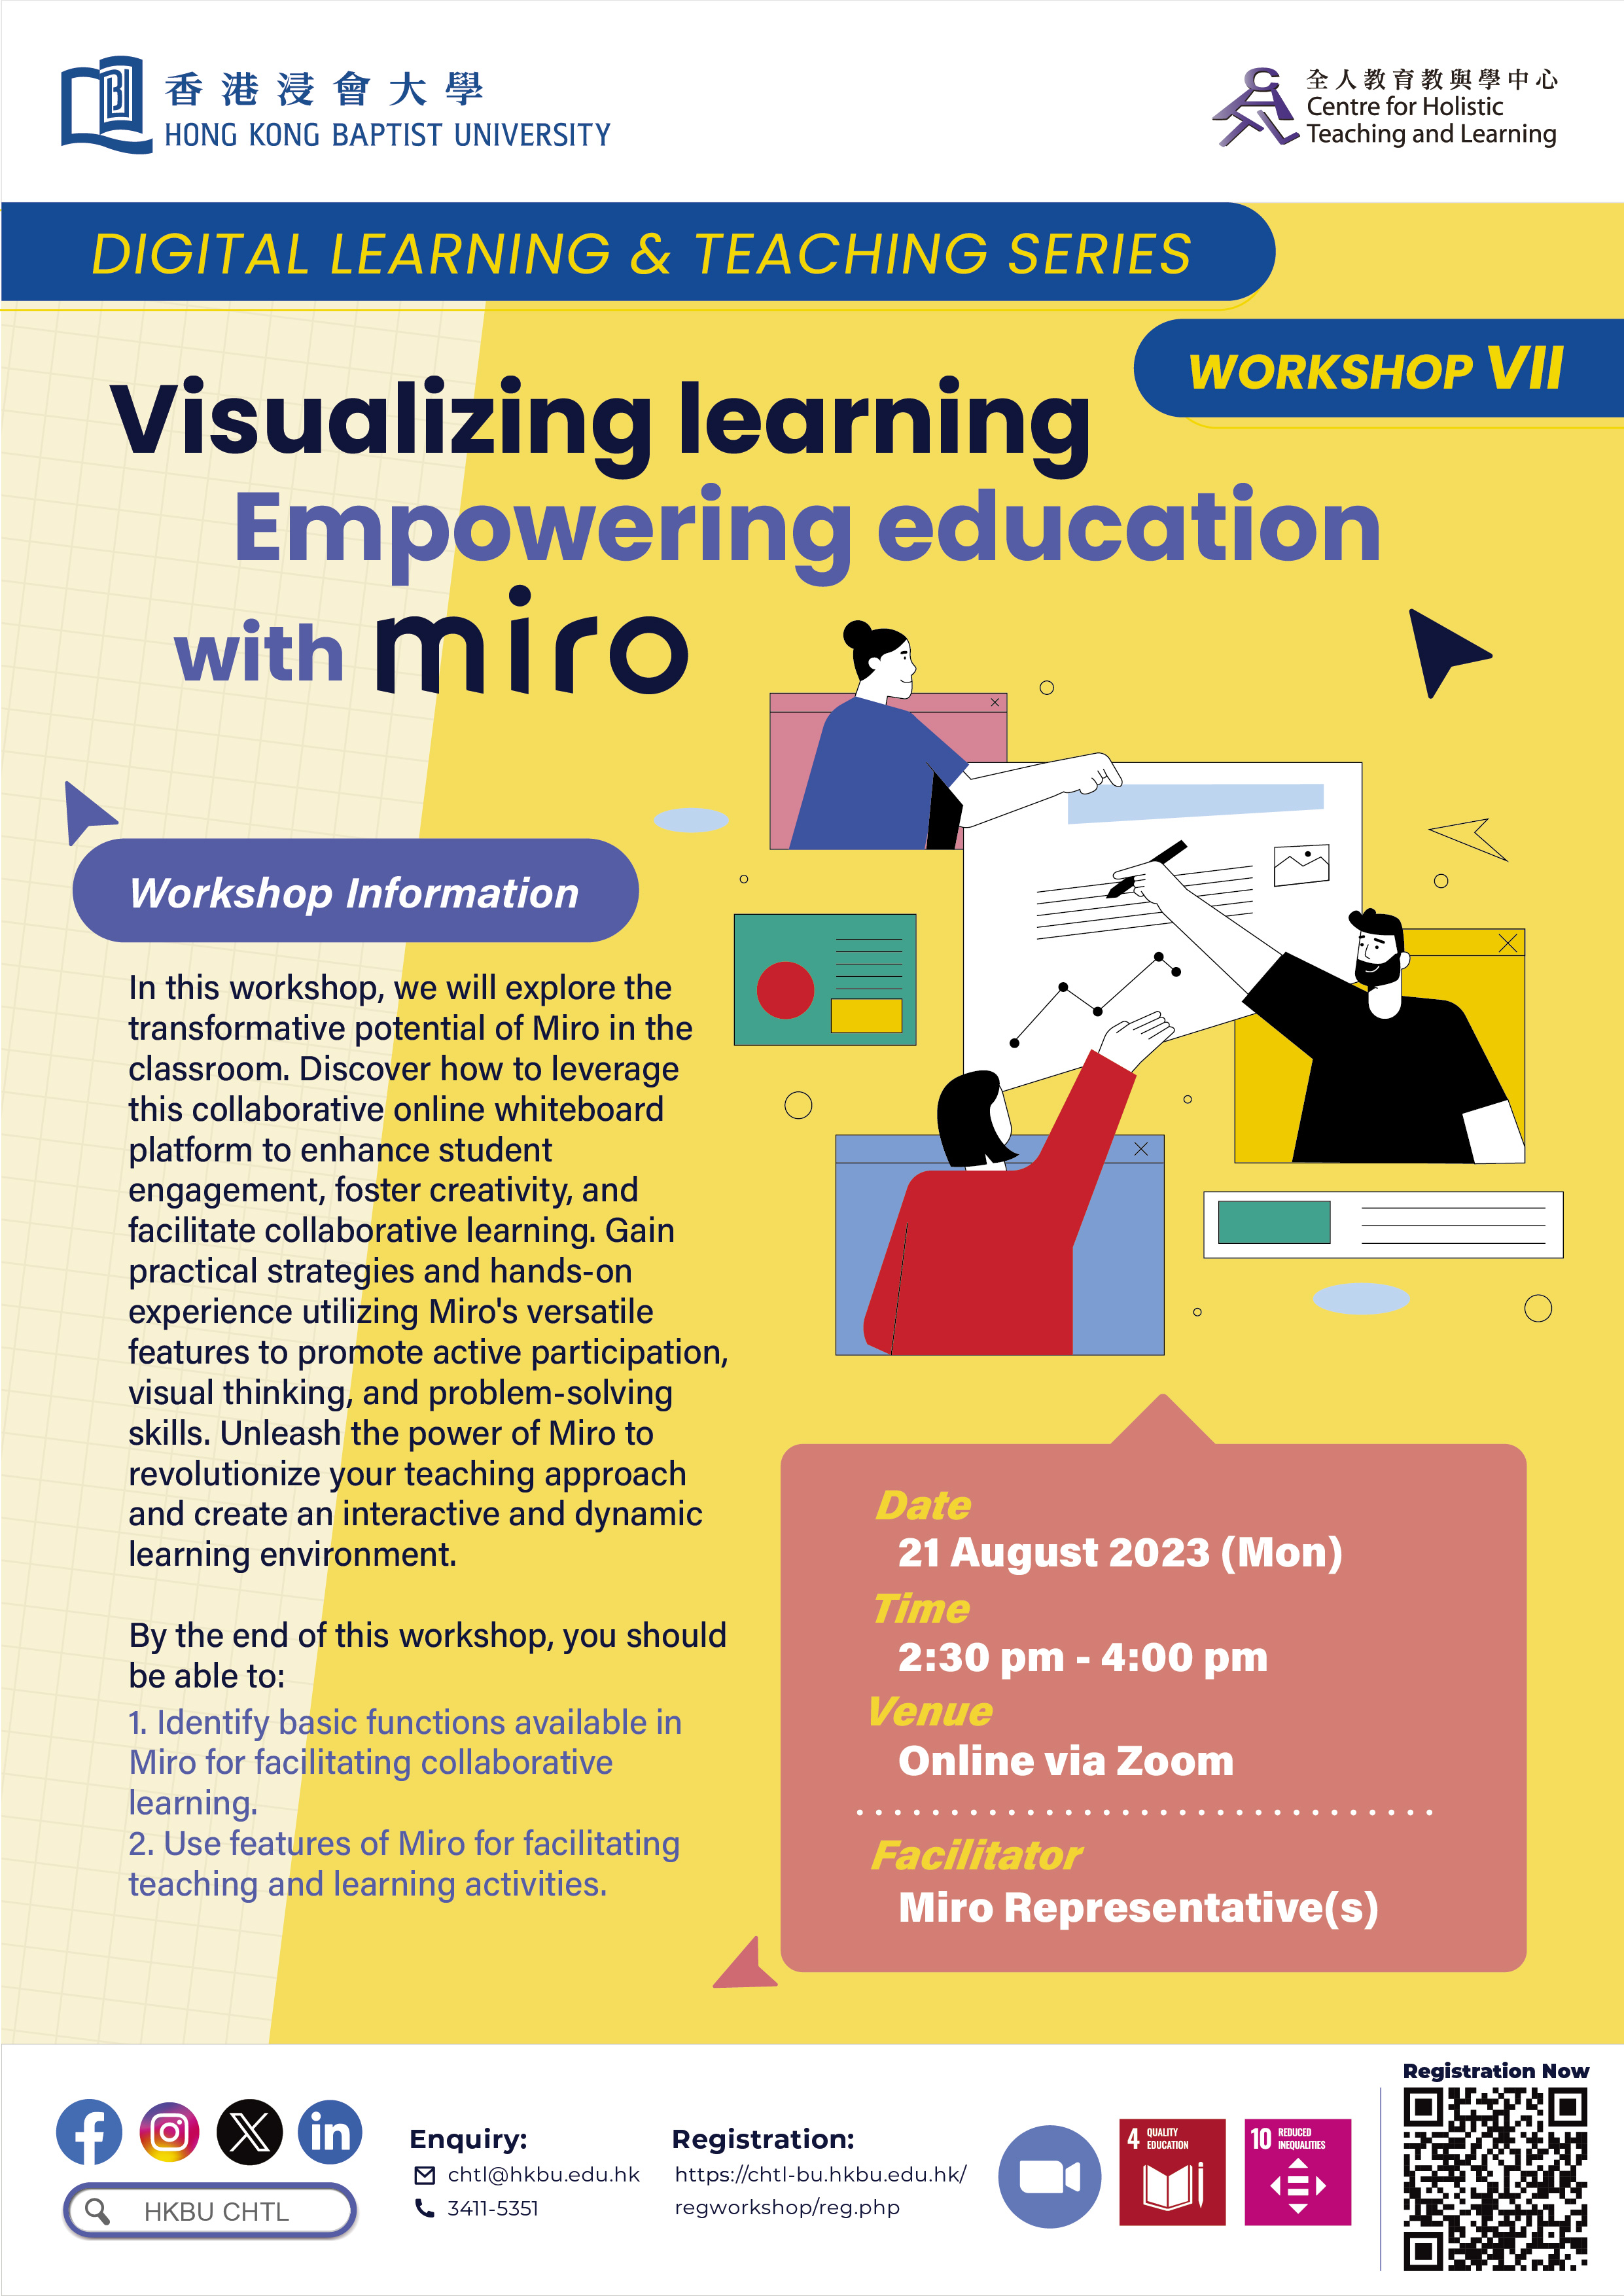 Workshop VII: Visualizing Learning: Empowering Education with Miro